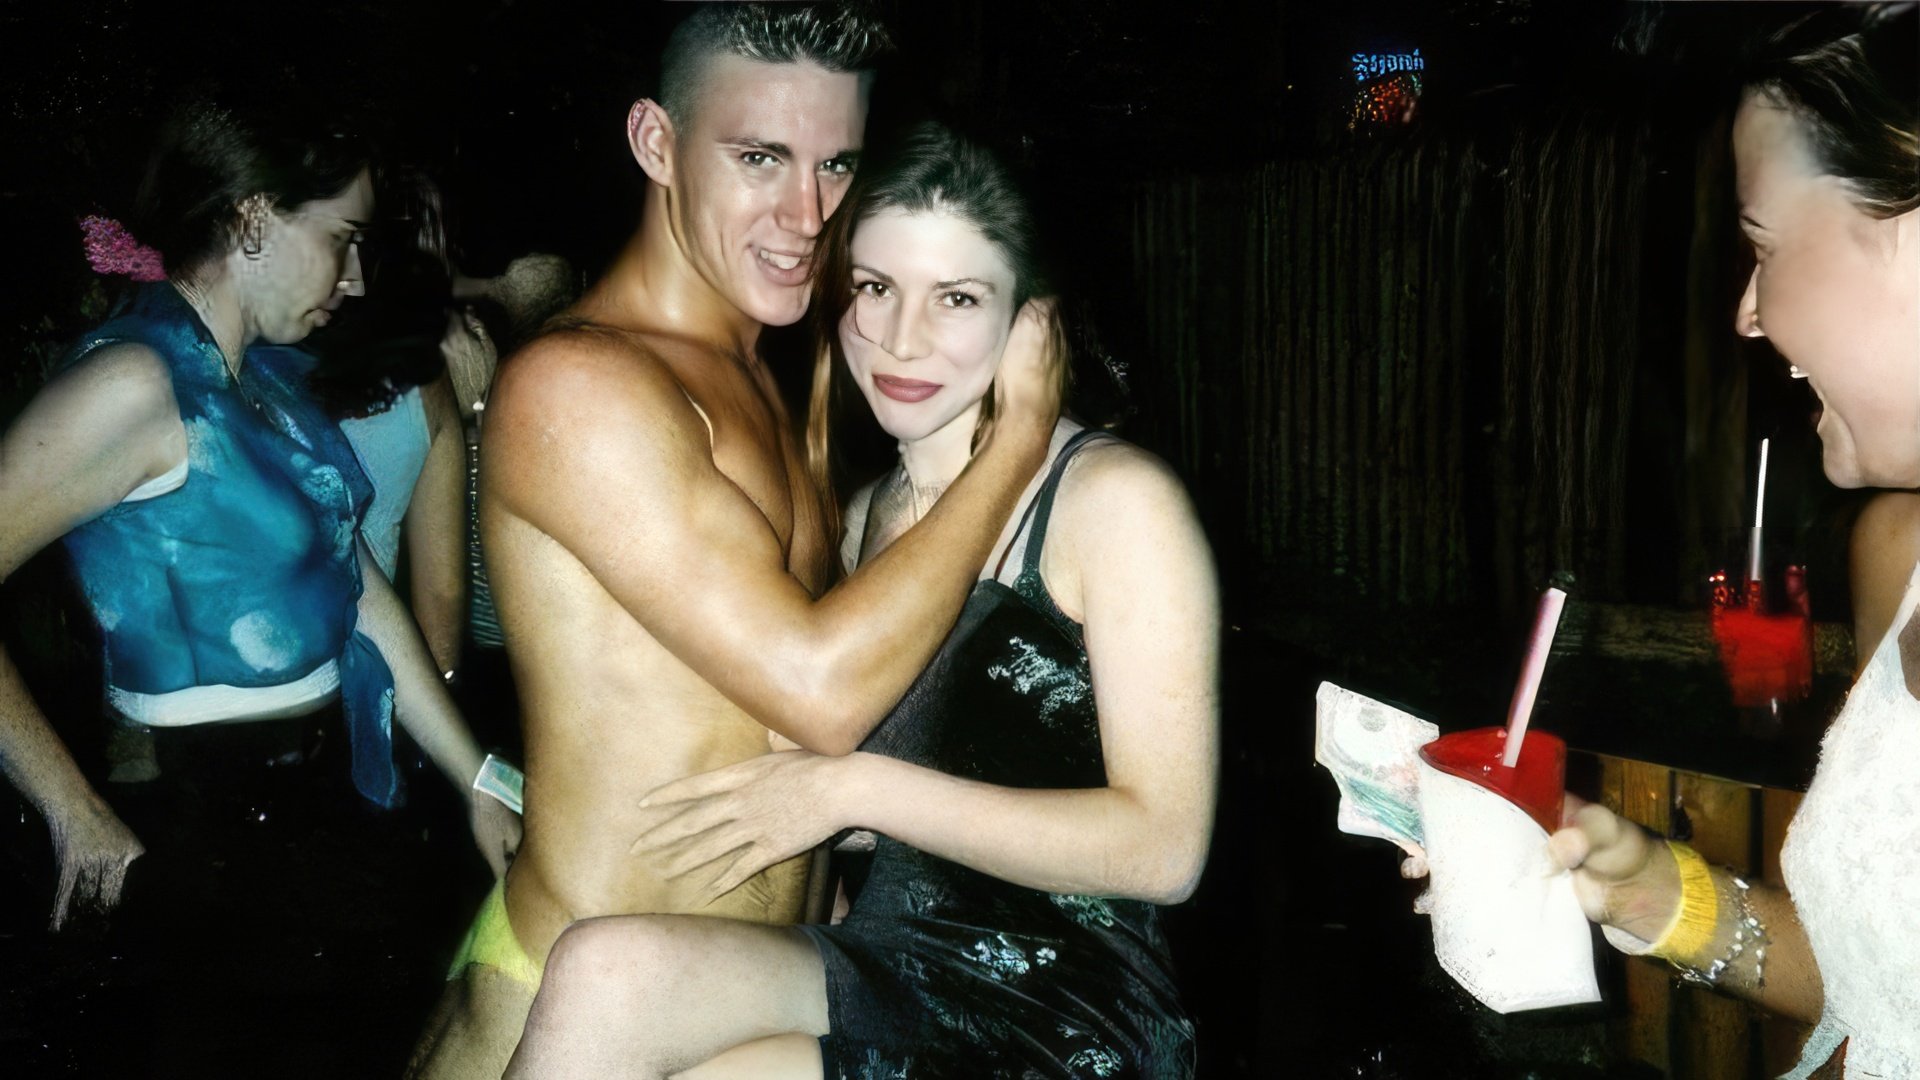 Channing Tatum worked as a stripper at the nightclub in his youth